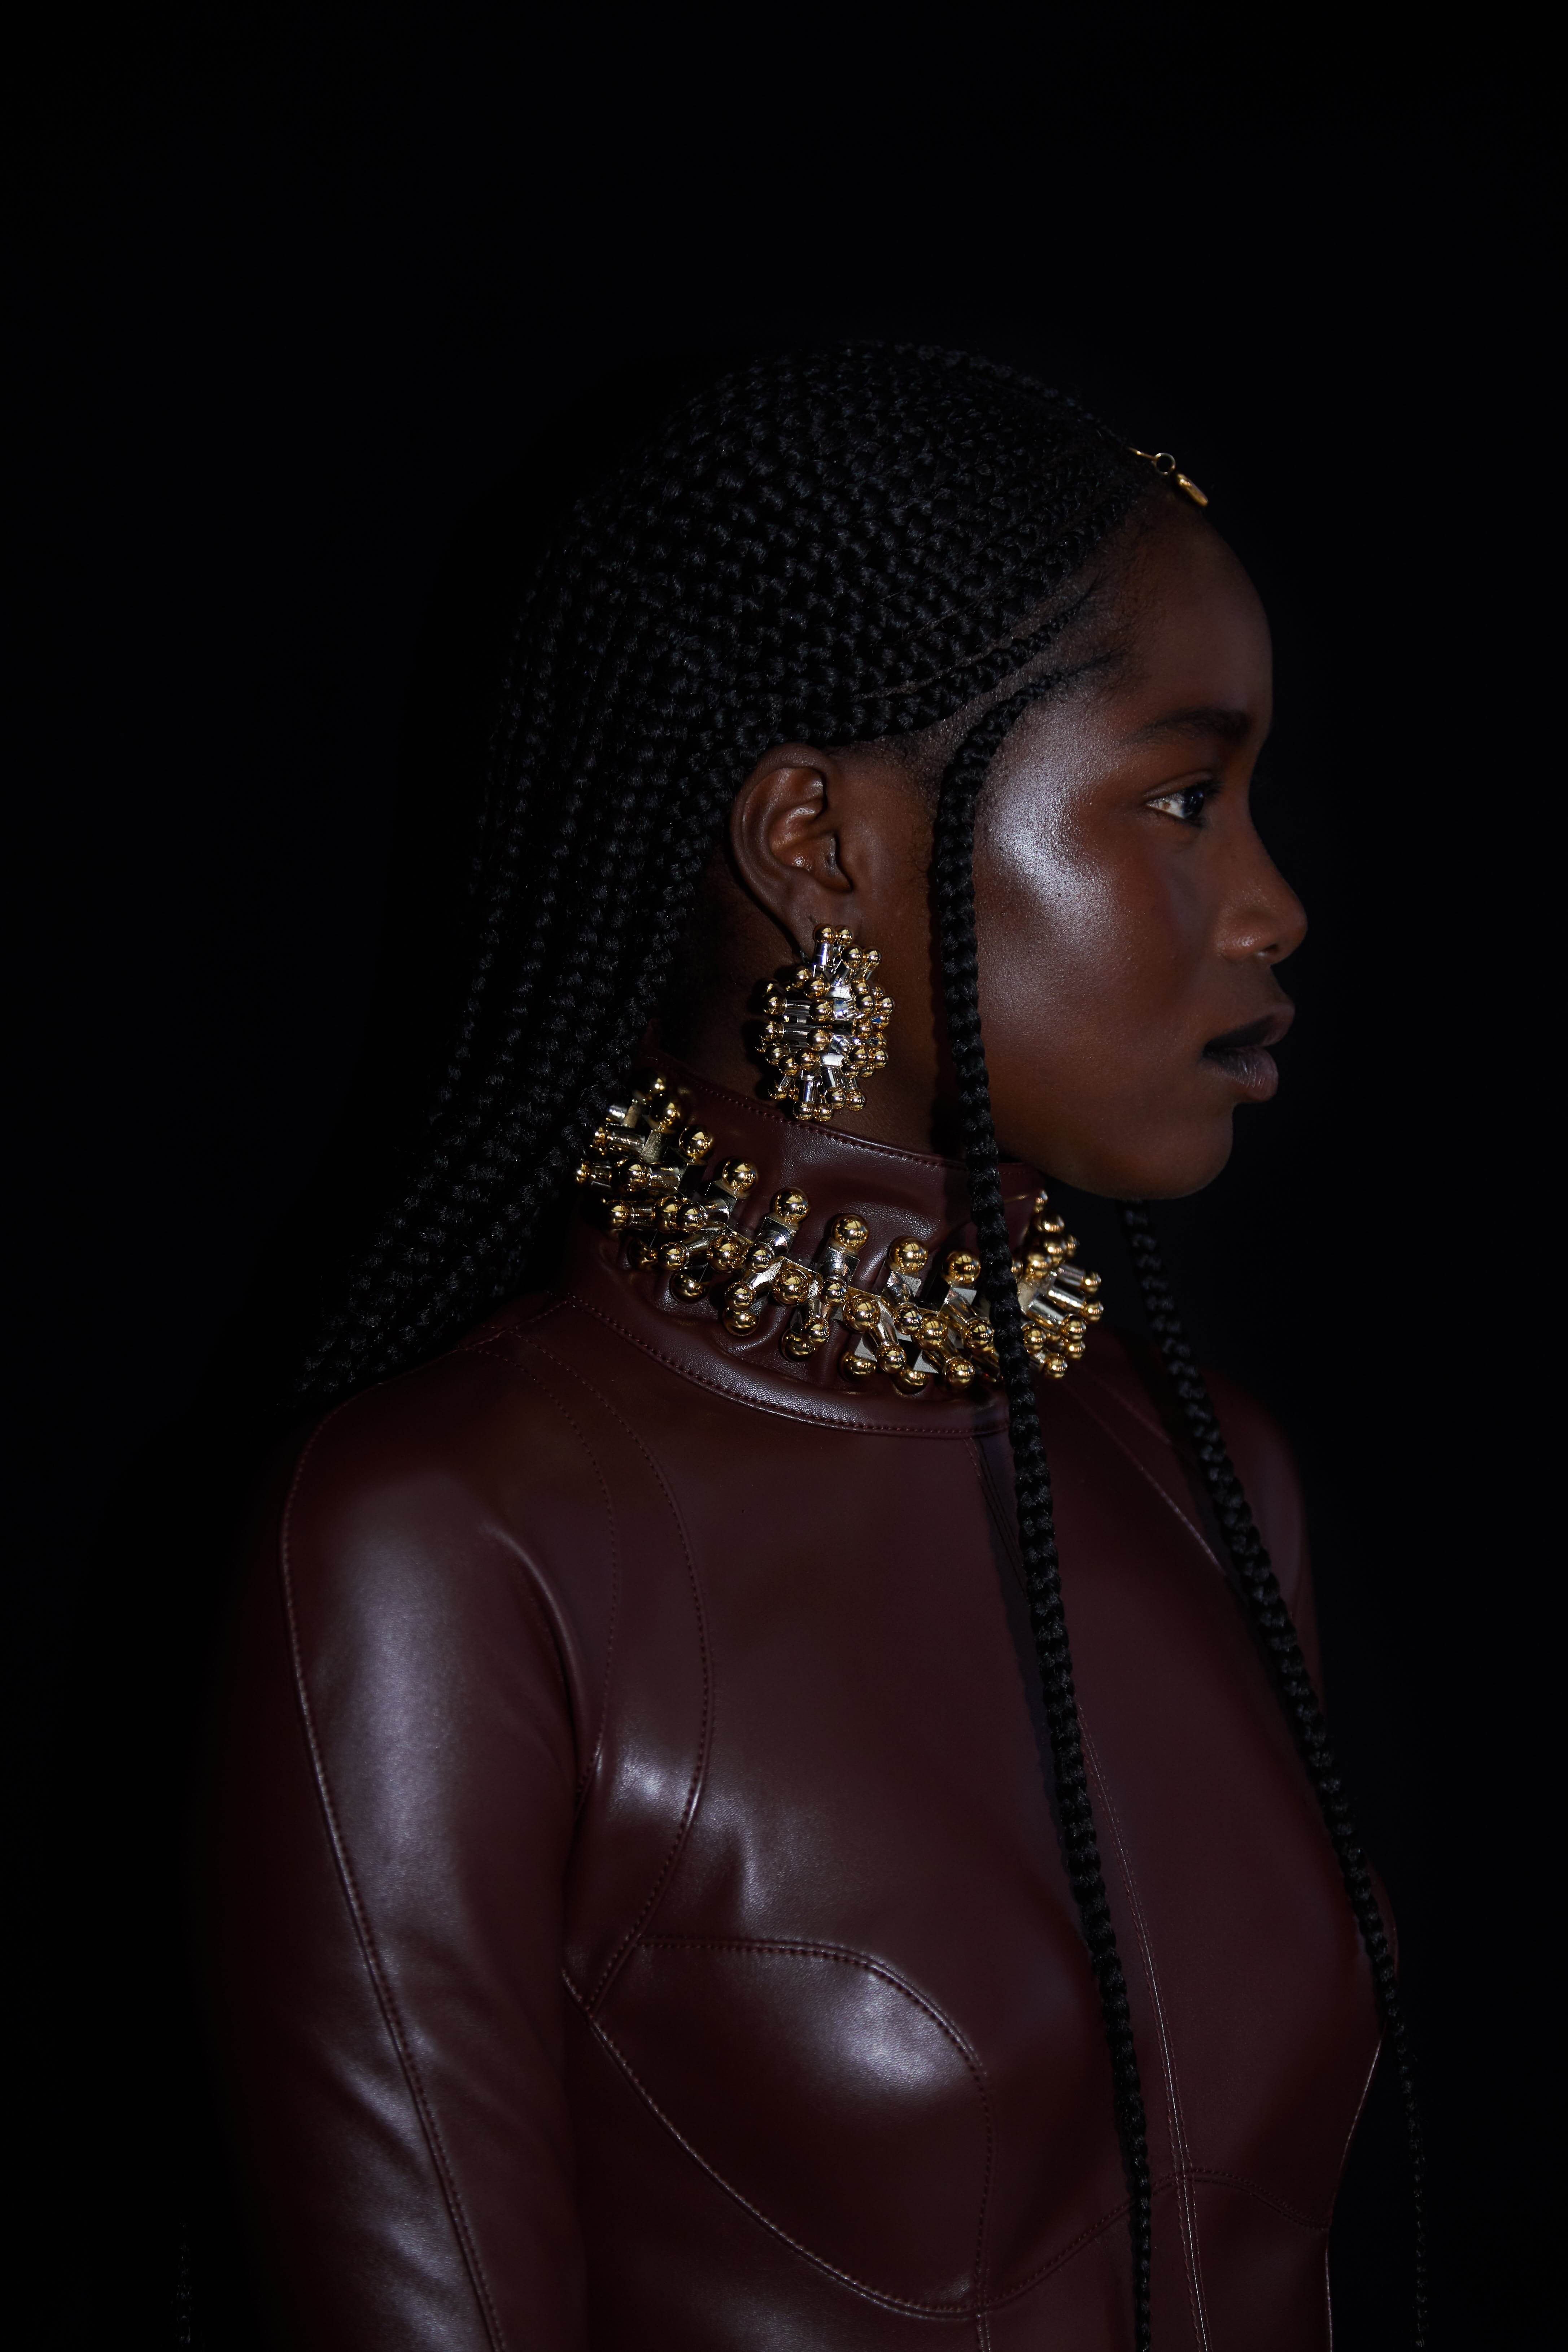 Model wearing large gold earrings and ring necklace